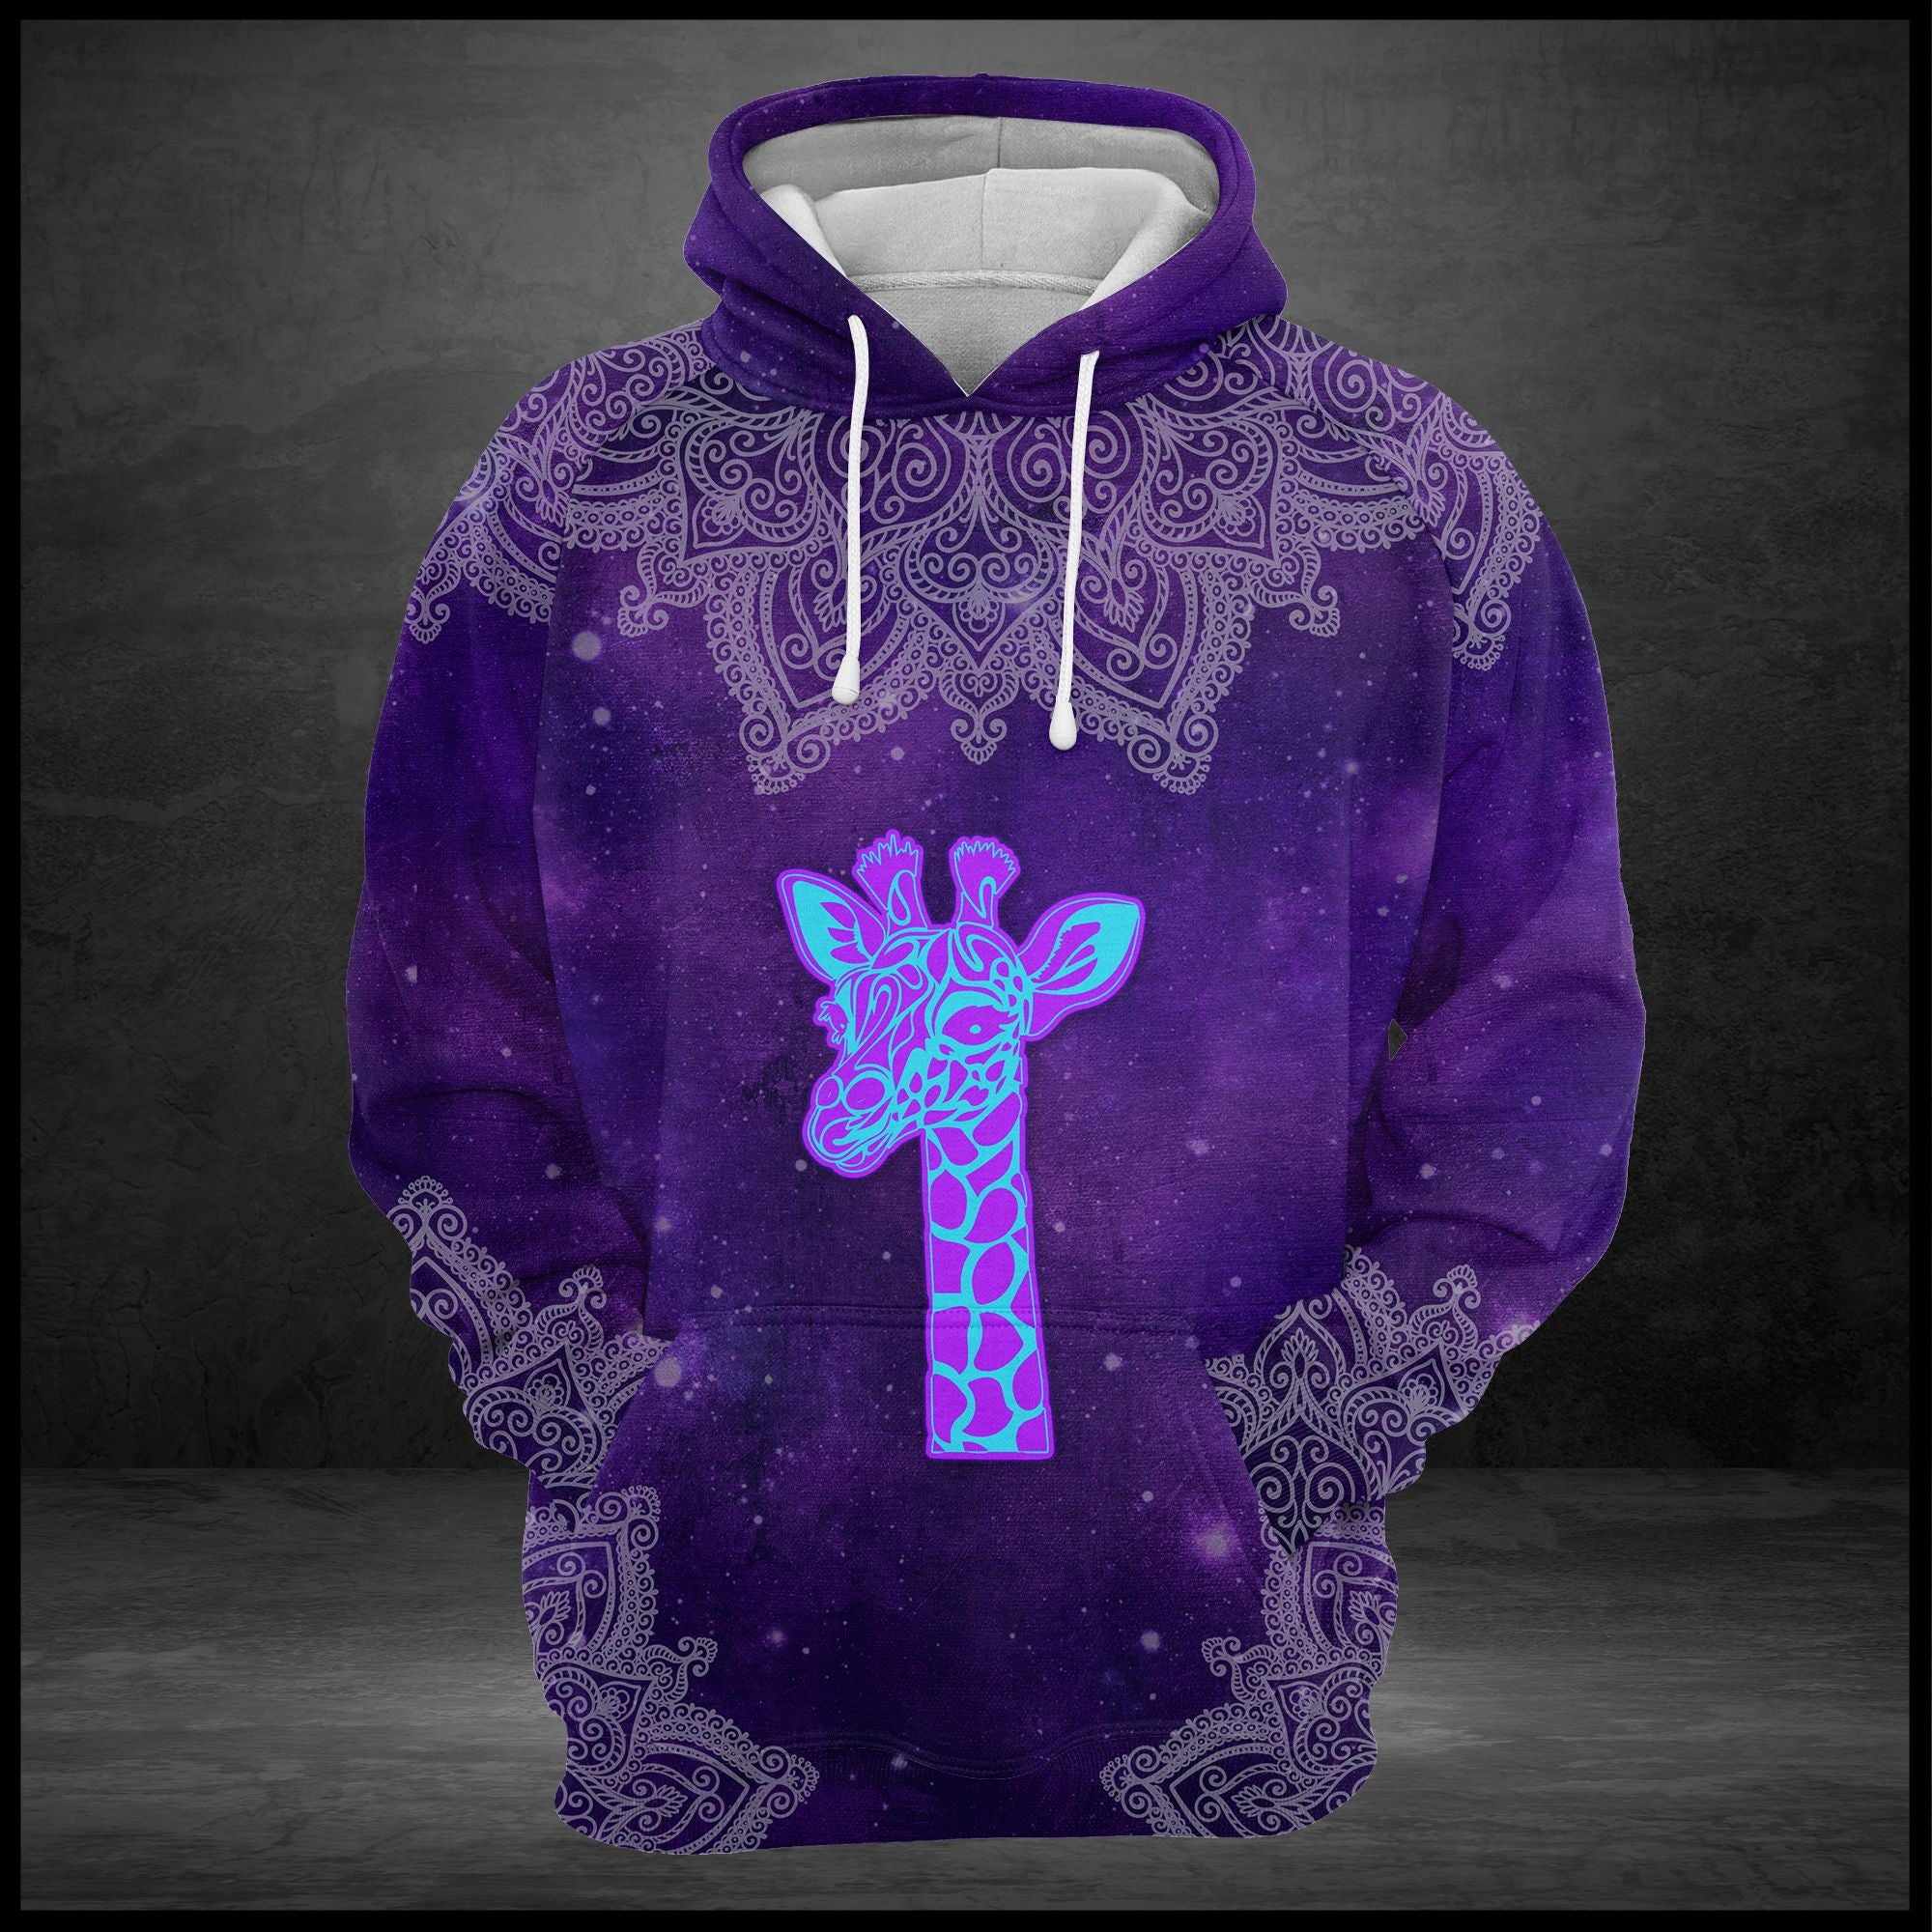 Awesome Purple Giraffe Mandala Pullover Premium Hoodie, Perfect Outfit For Men And Women On Christmas New Year Autumn Winter